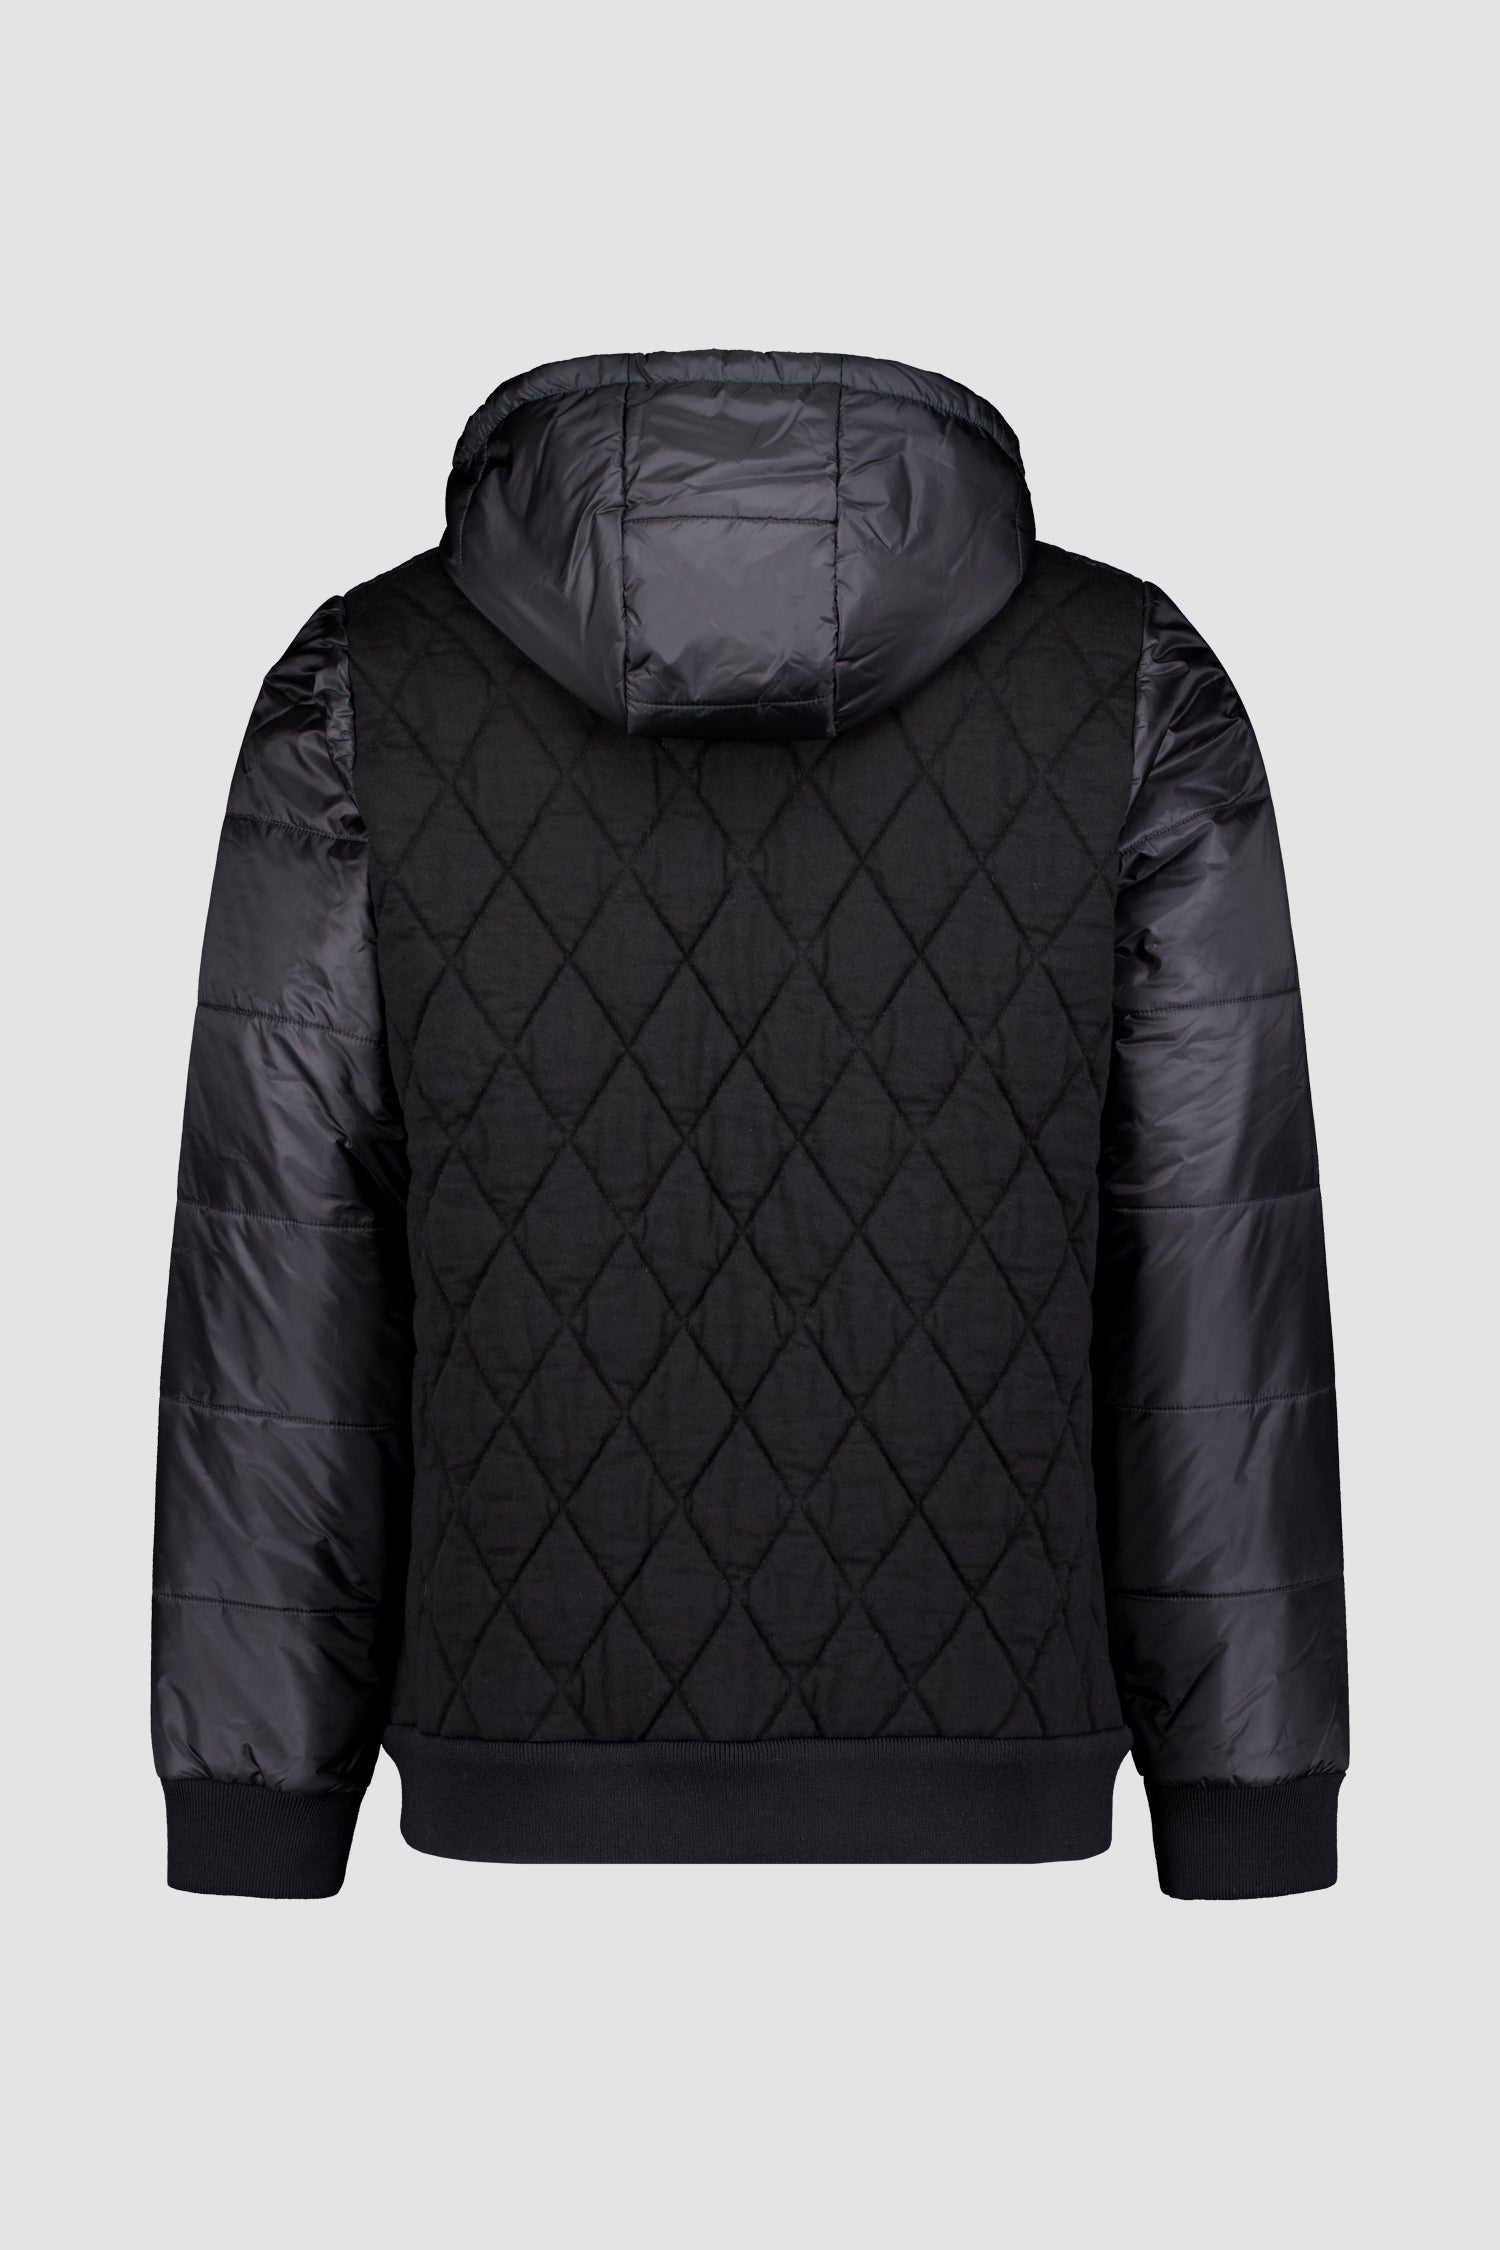 Shop Branded Luxury Men's Jackets From Top Designers